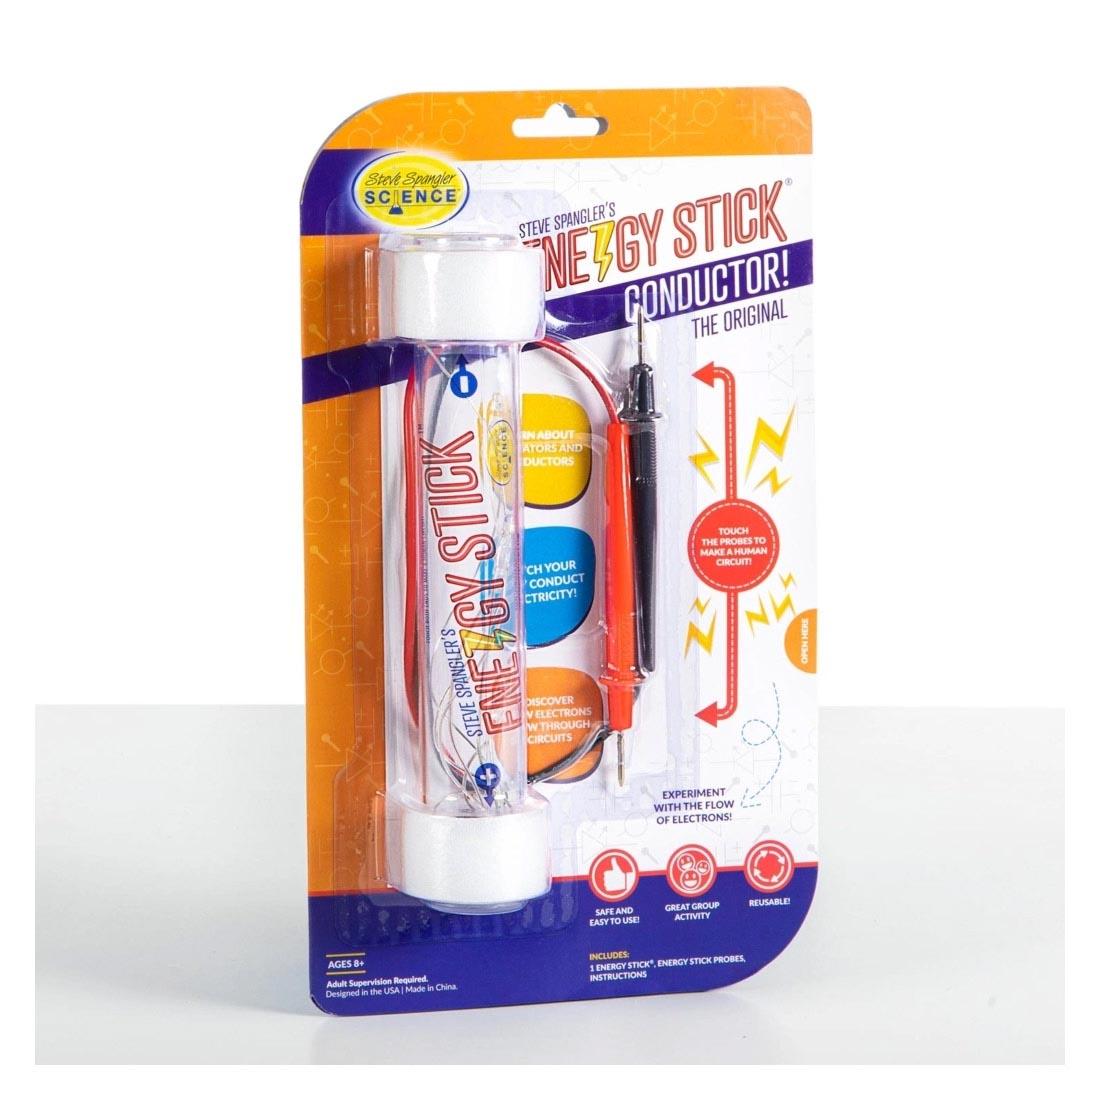 Energy Stick Conductor Set By Steve Spangler Science Package